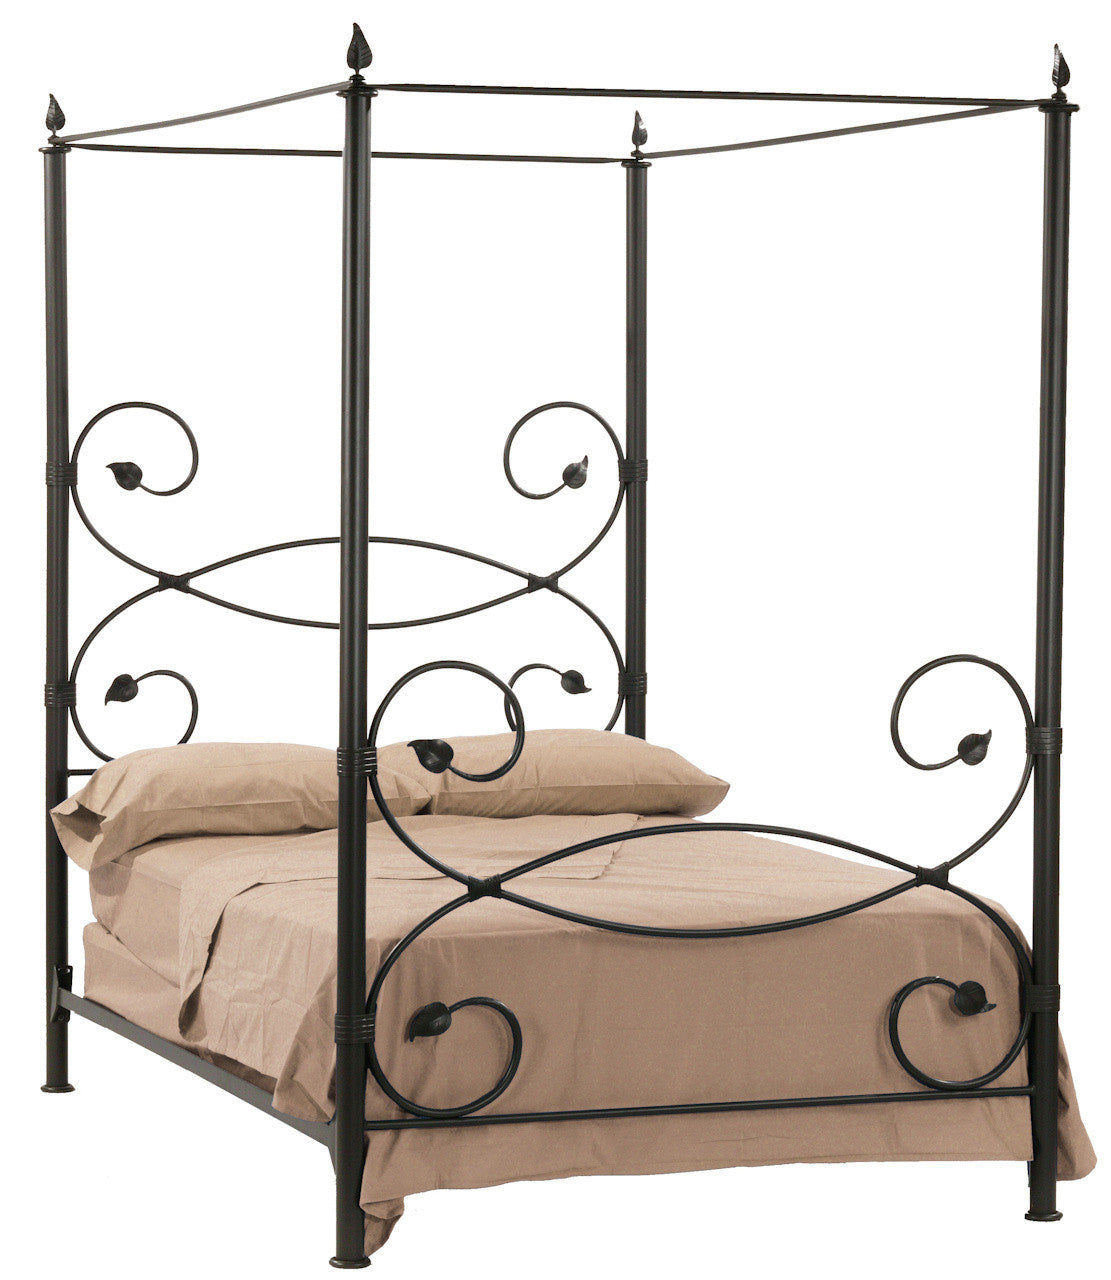 Stone County Ironworks 900-743 Leaf Canopy California King Bed